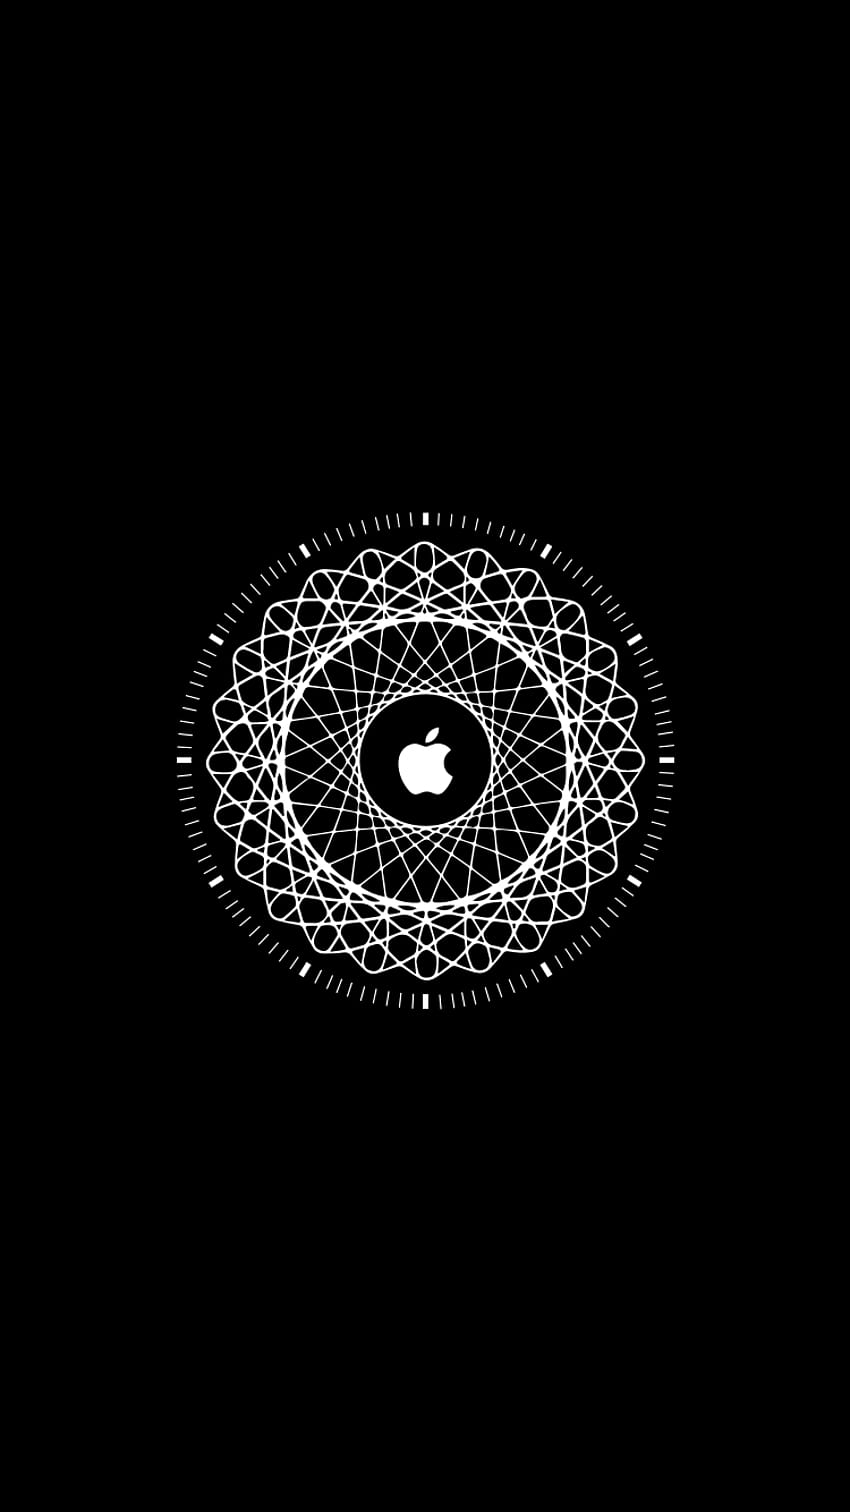 Apple Watch for iPhone, iPad, and HD phone wallpaper